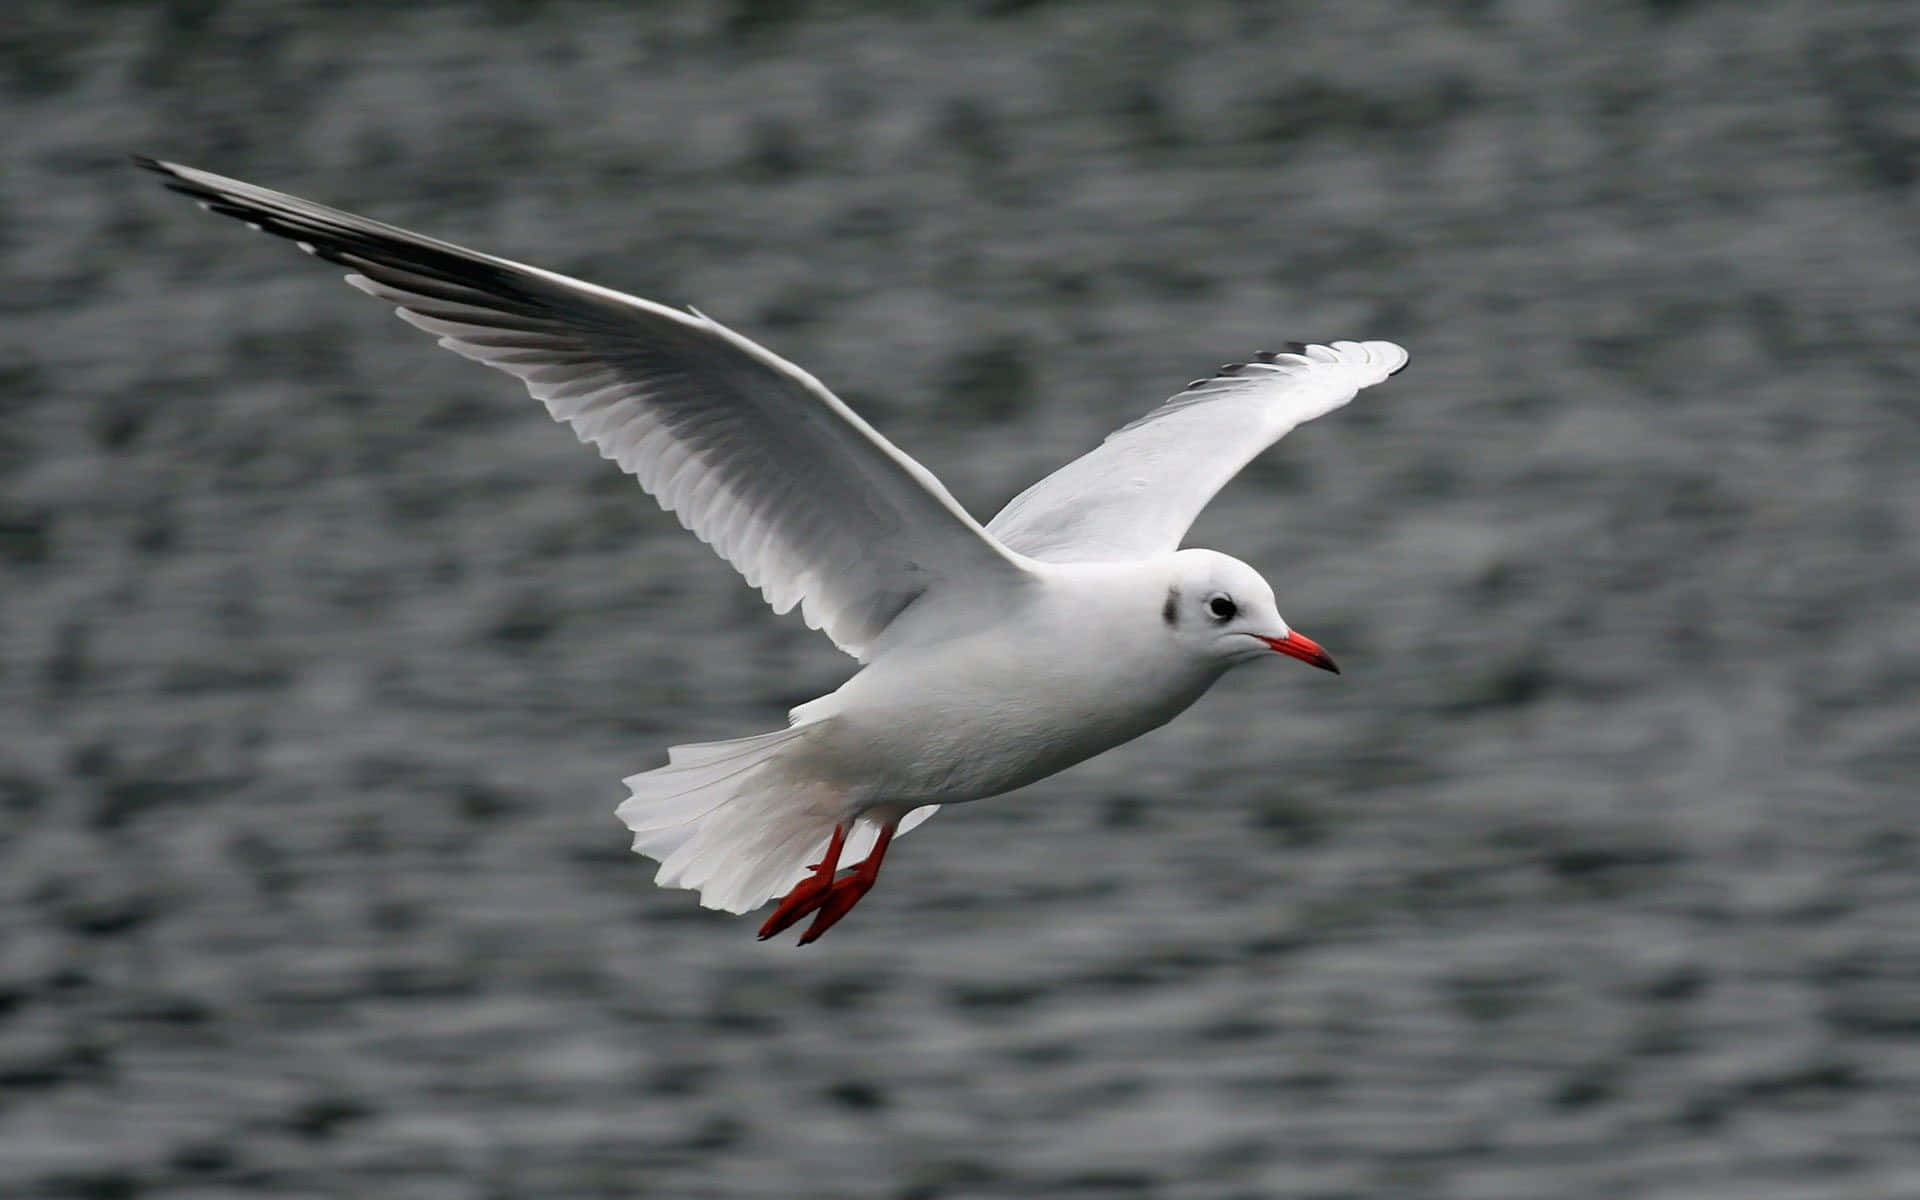 Graceful Seagull Soaring High in the Sky Wallpaper